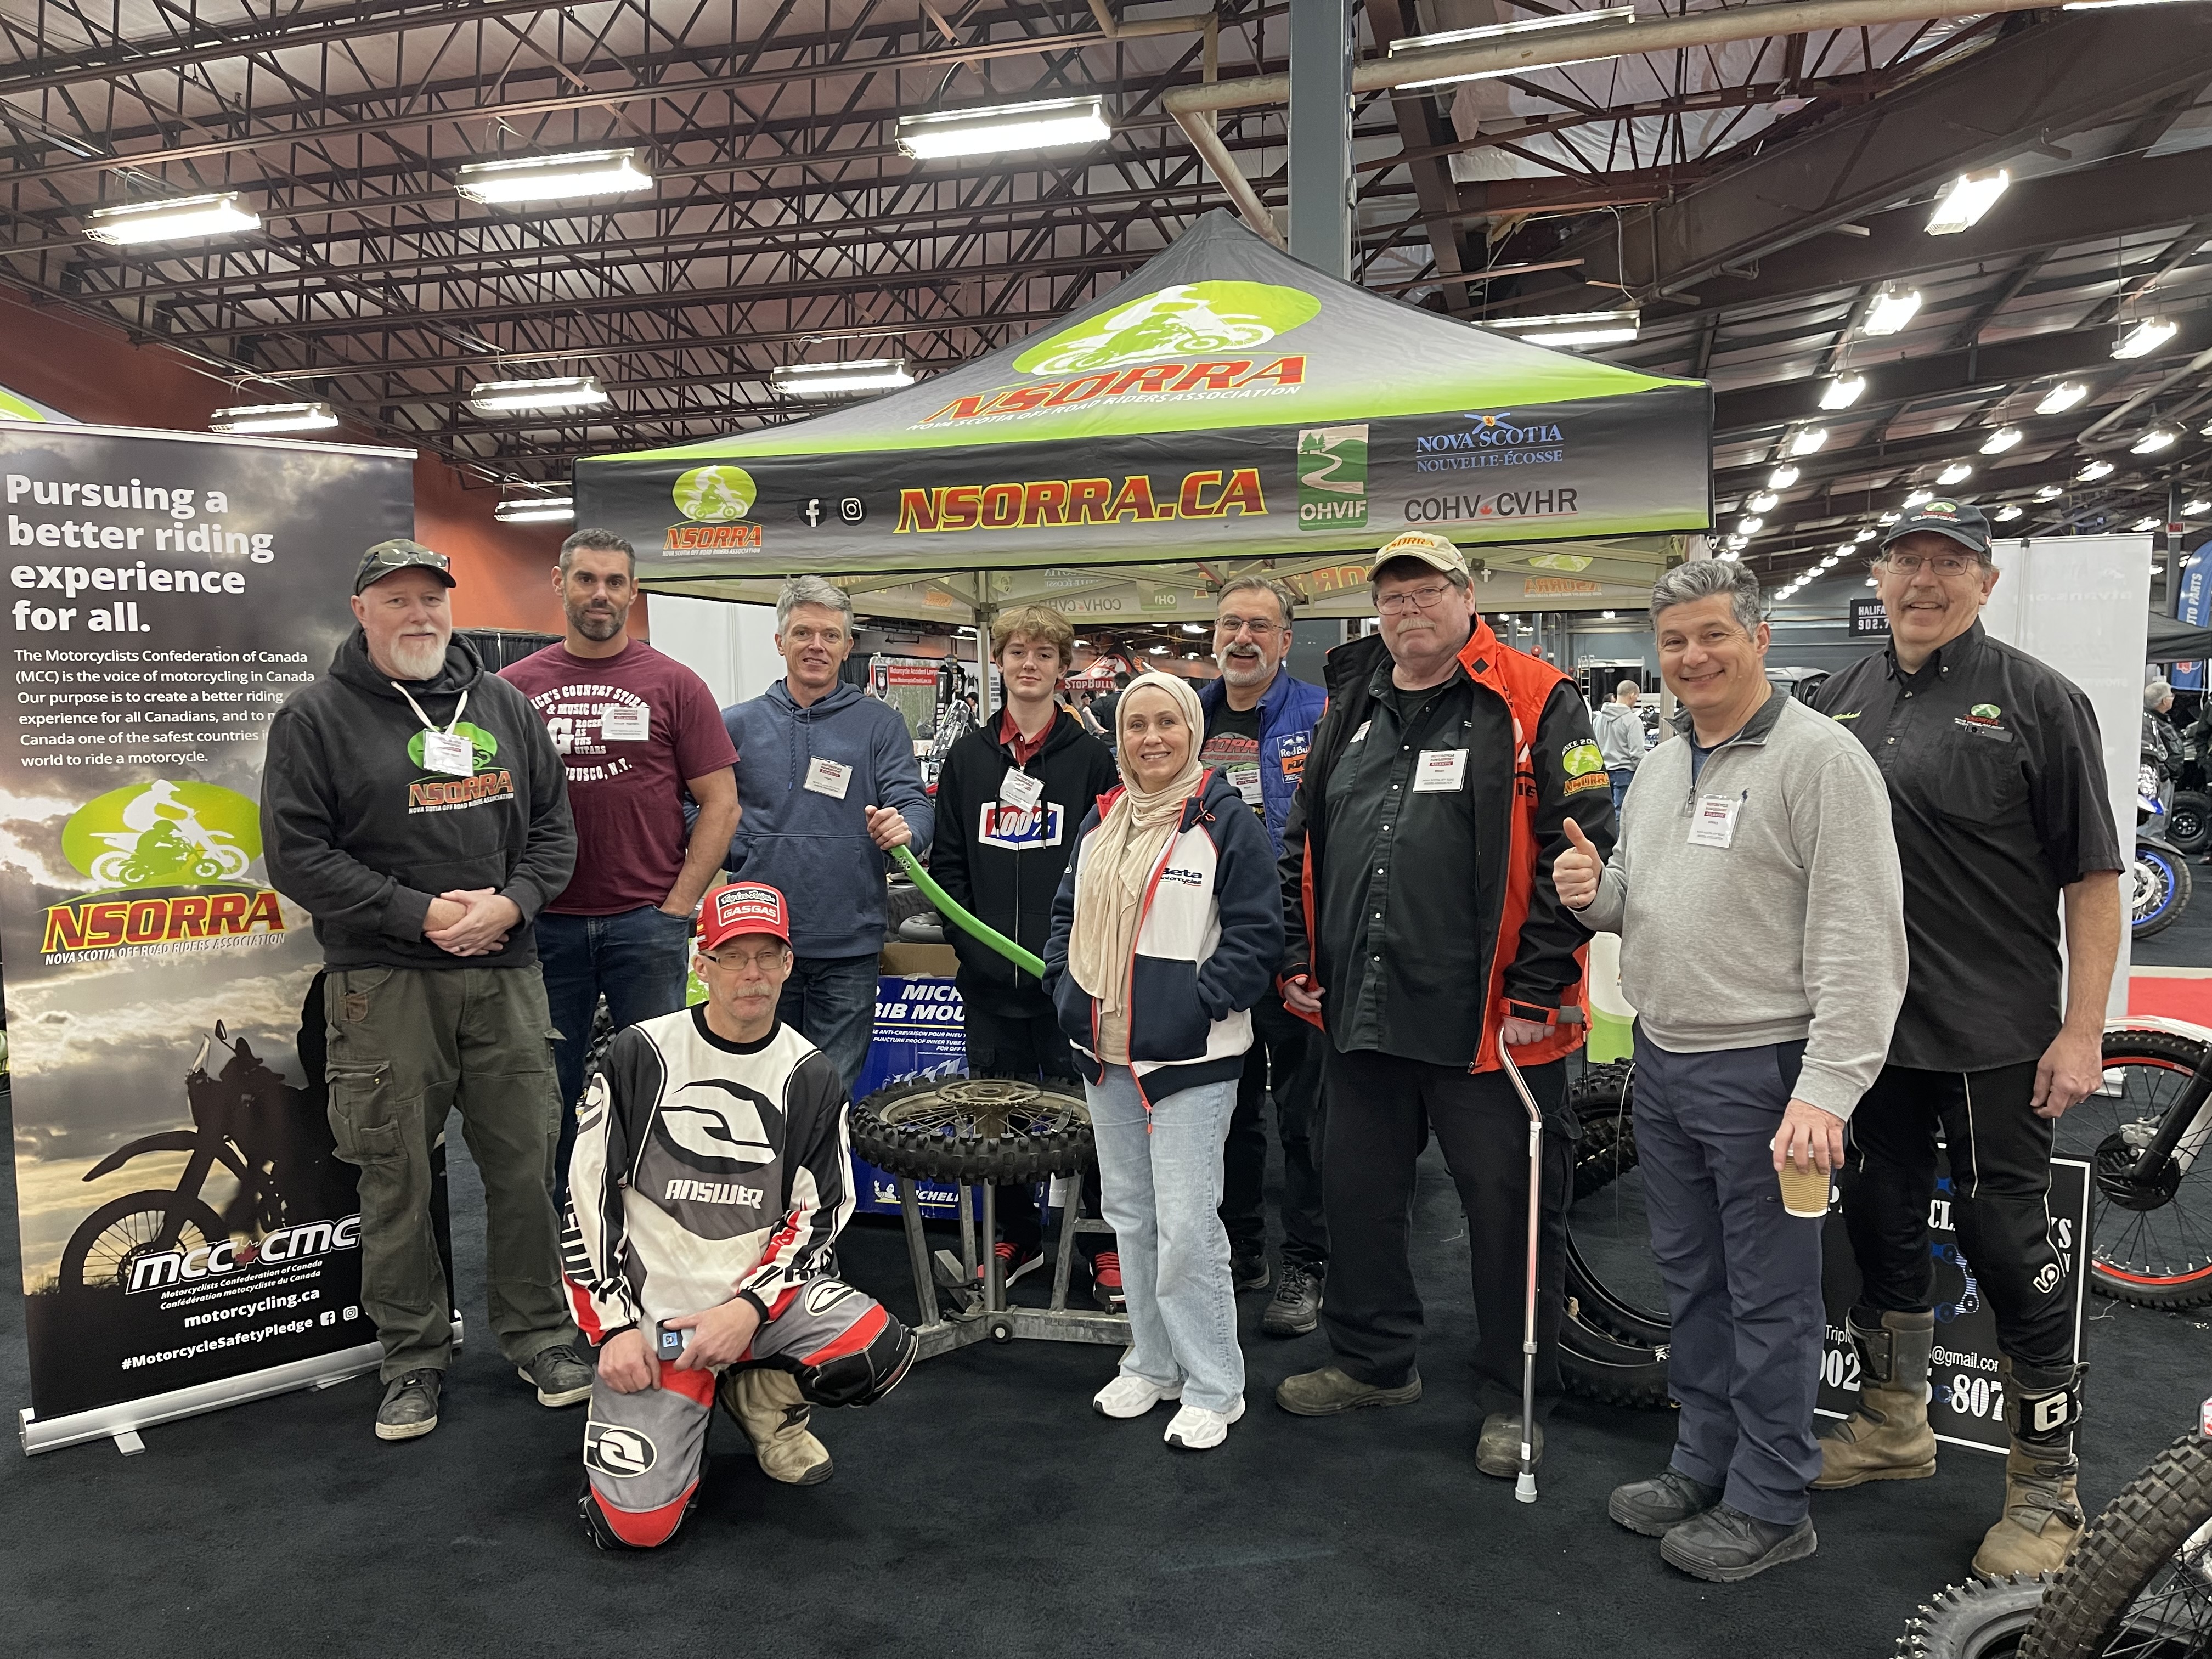 Several NSORRA booth volunteers pose in front of the NSORRA display at the Moto Show